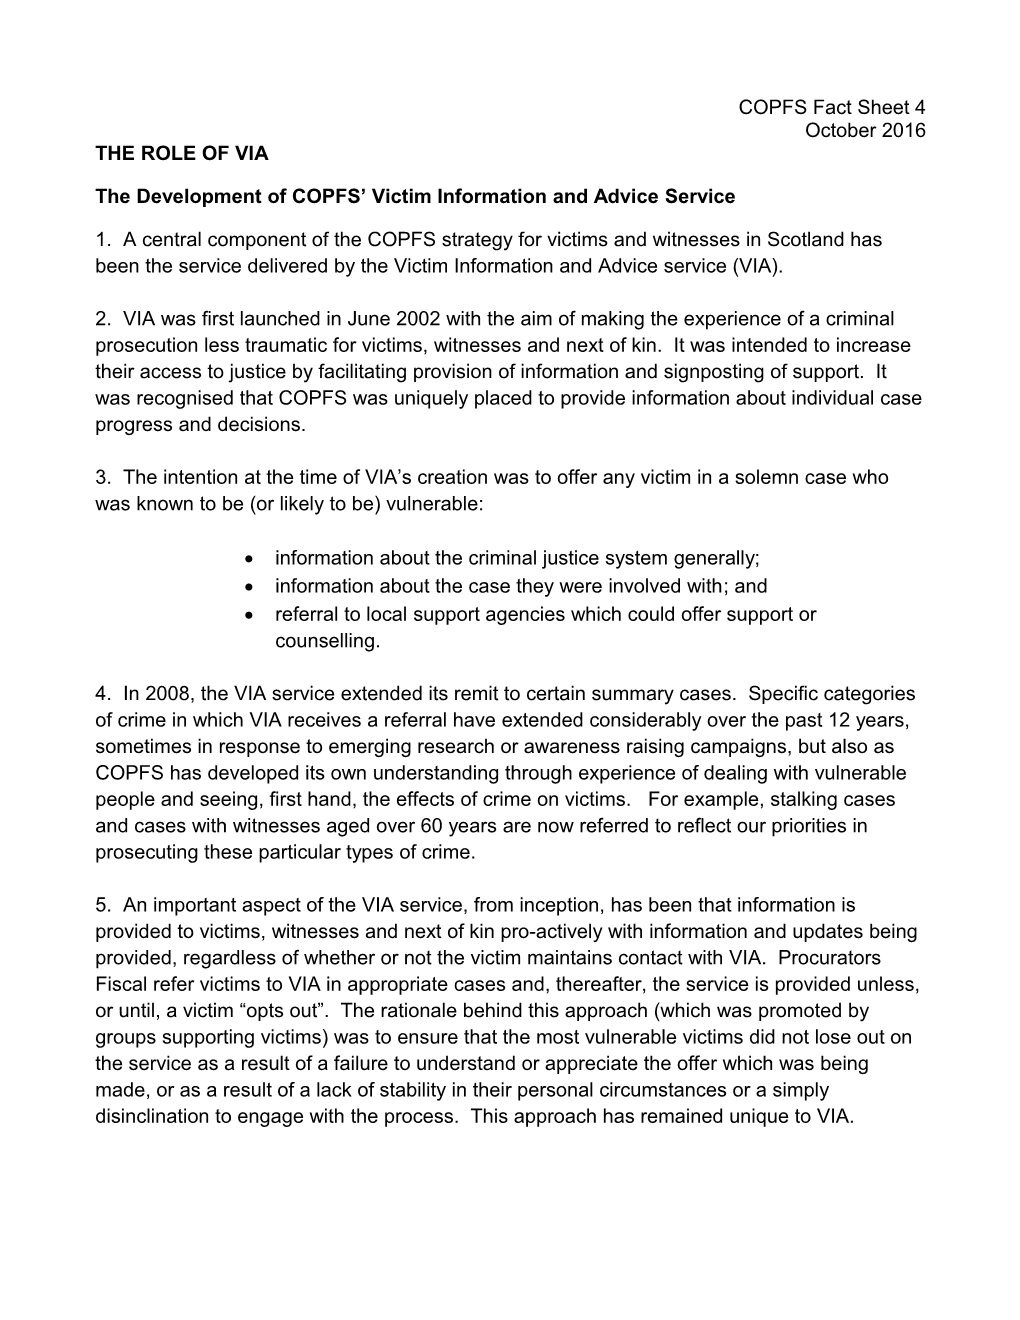 The Development of COPFS Victim Information and Advice Service